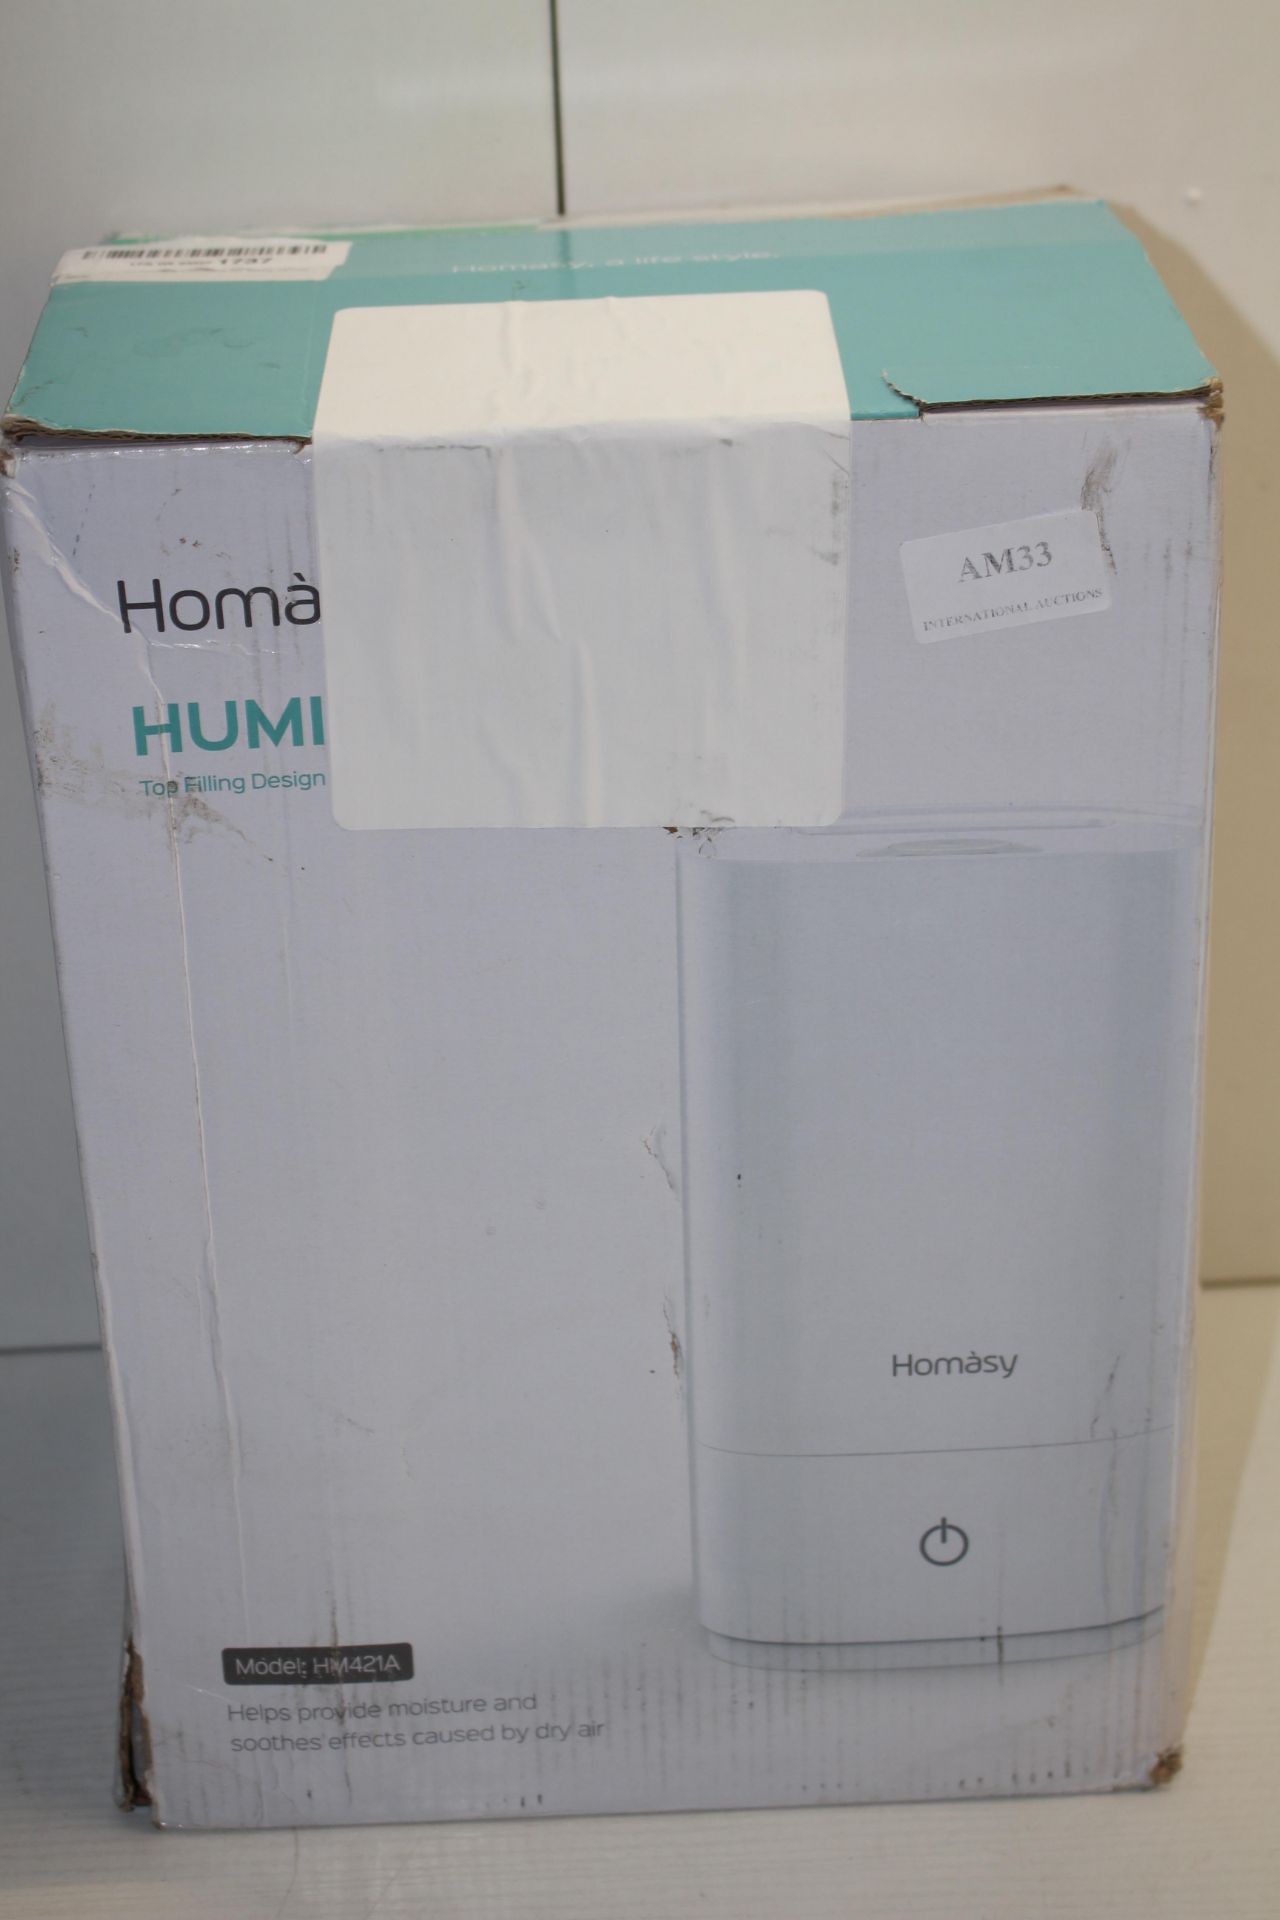 BOXED HOMASY HUMIDIFIER MODEL: HM421A RRP £39.99Condition ReportAppraisal Available on Request-